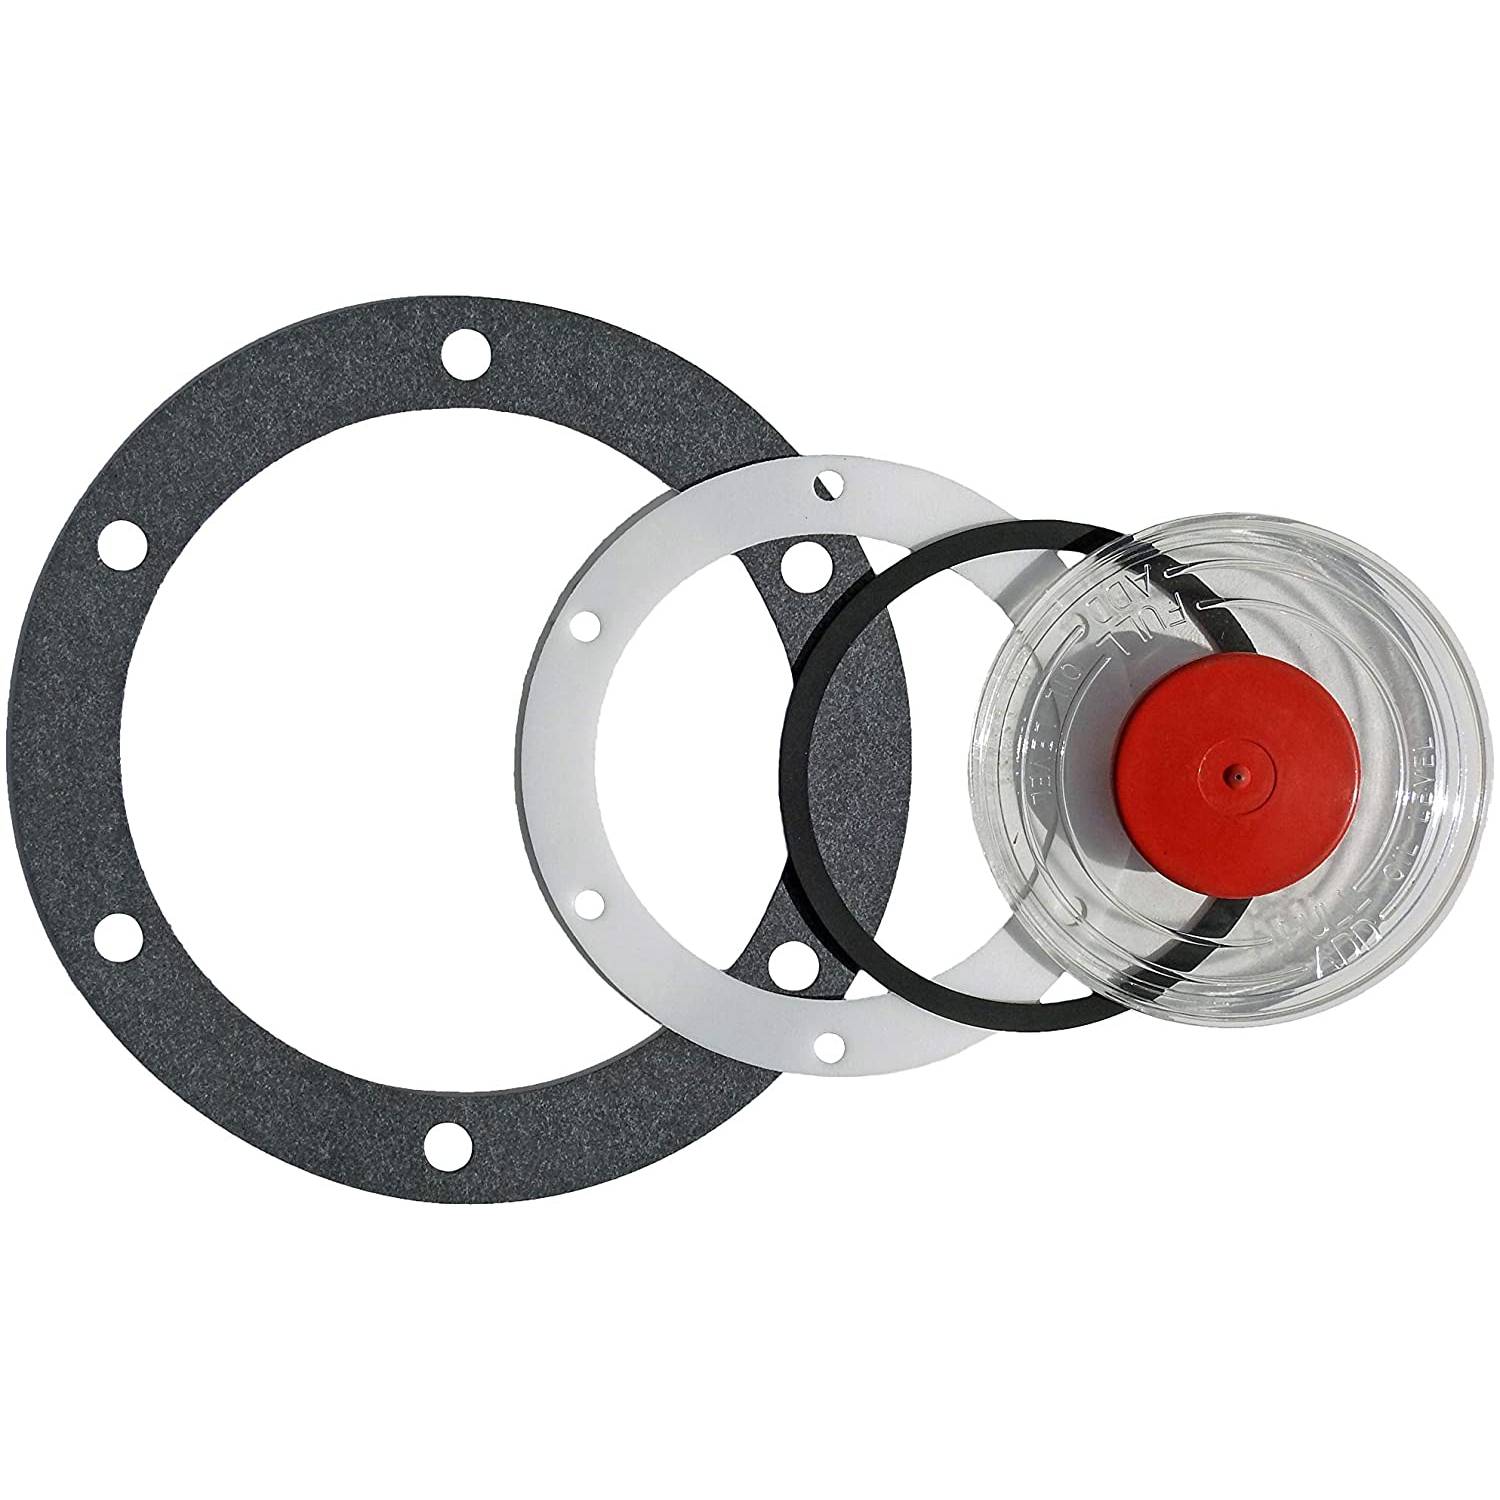 Window and Gasket Replacement Kit for 343-4195 Hub Caps